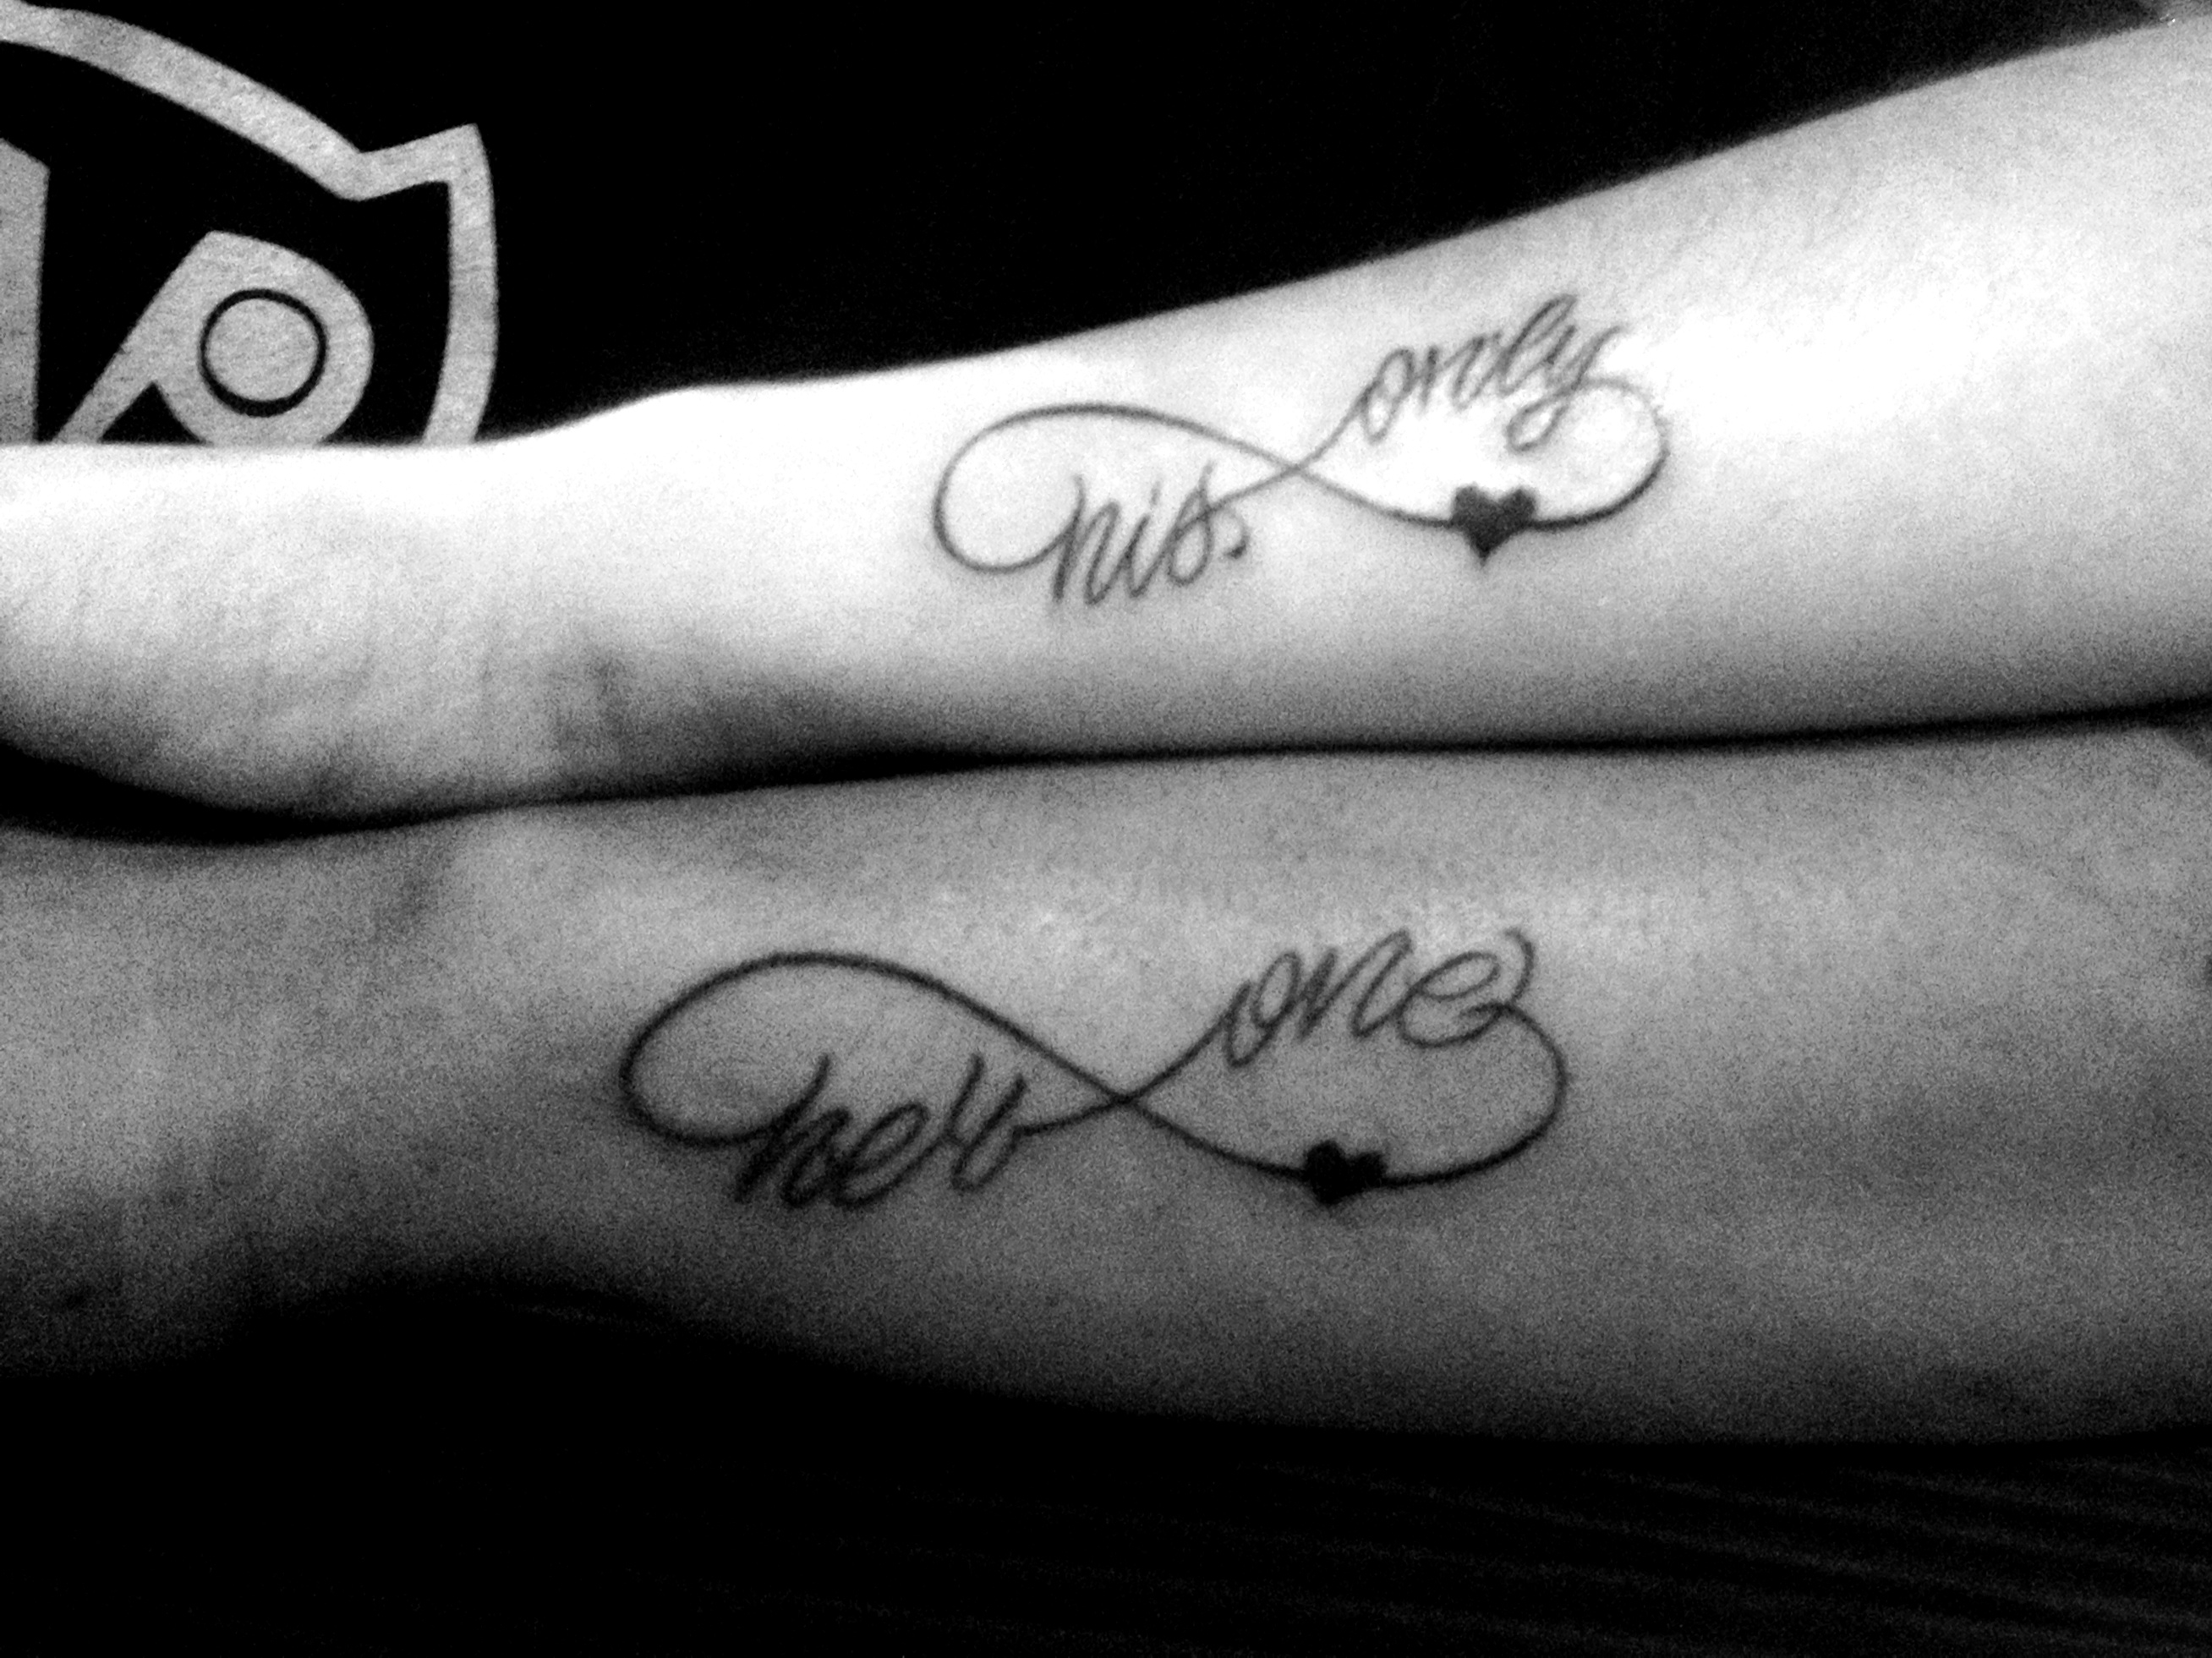 His and Hers Matching Tattoos Designs, Ideas and Meaning